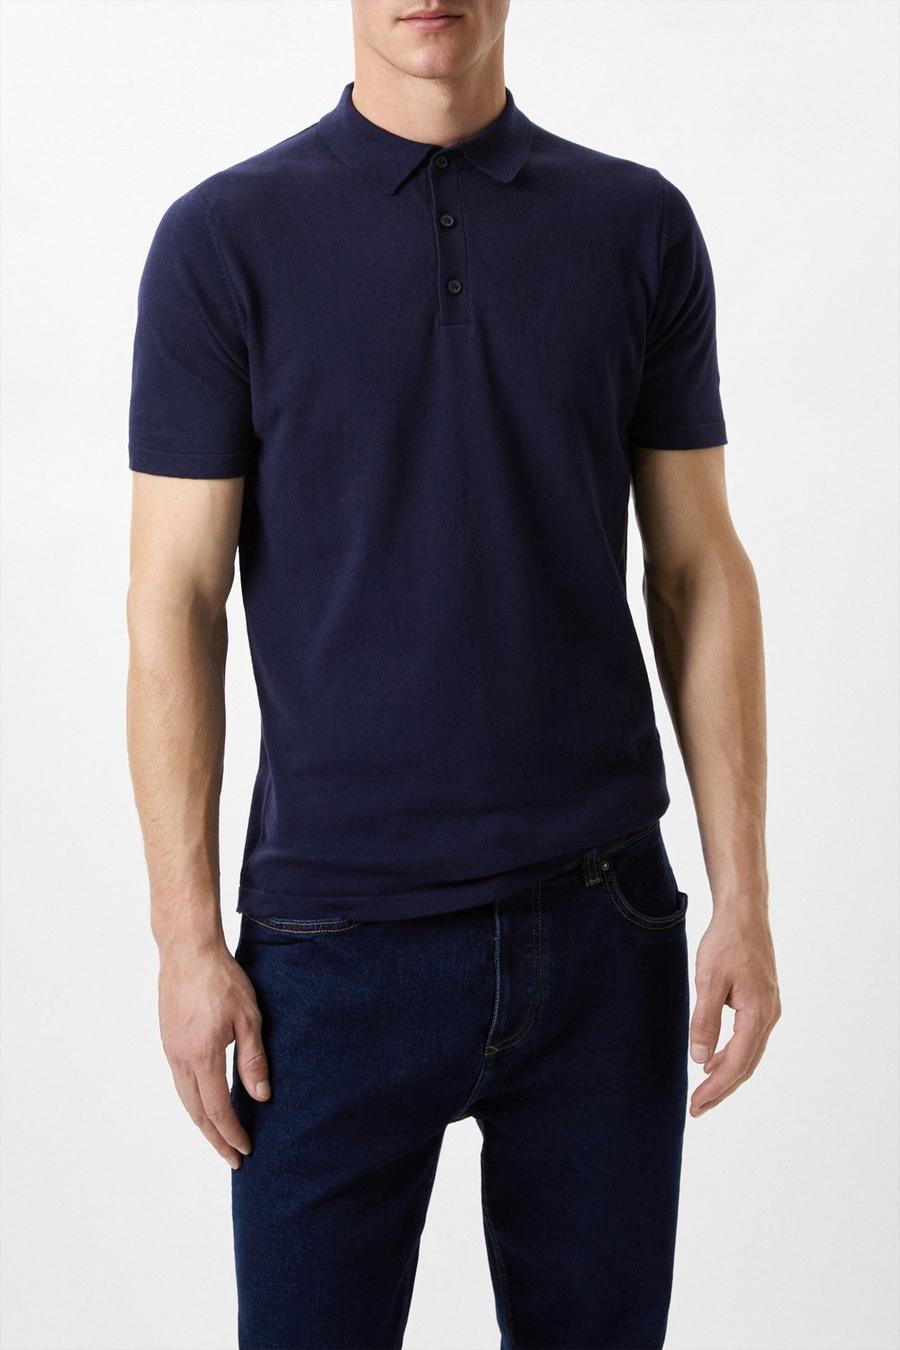 Cotton Rich Navy Modern Knitted Polo Shirt